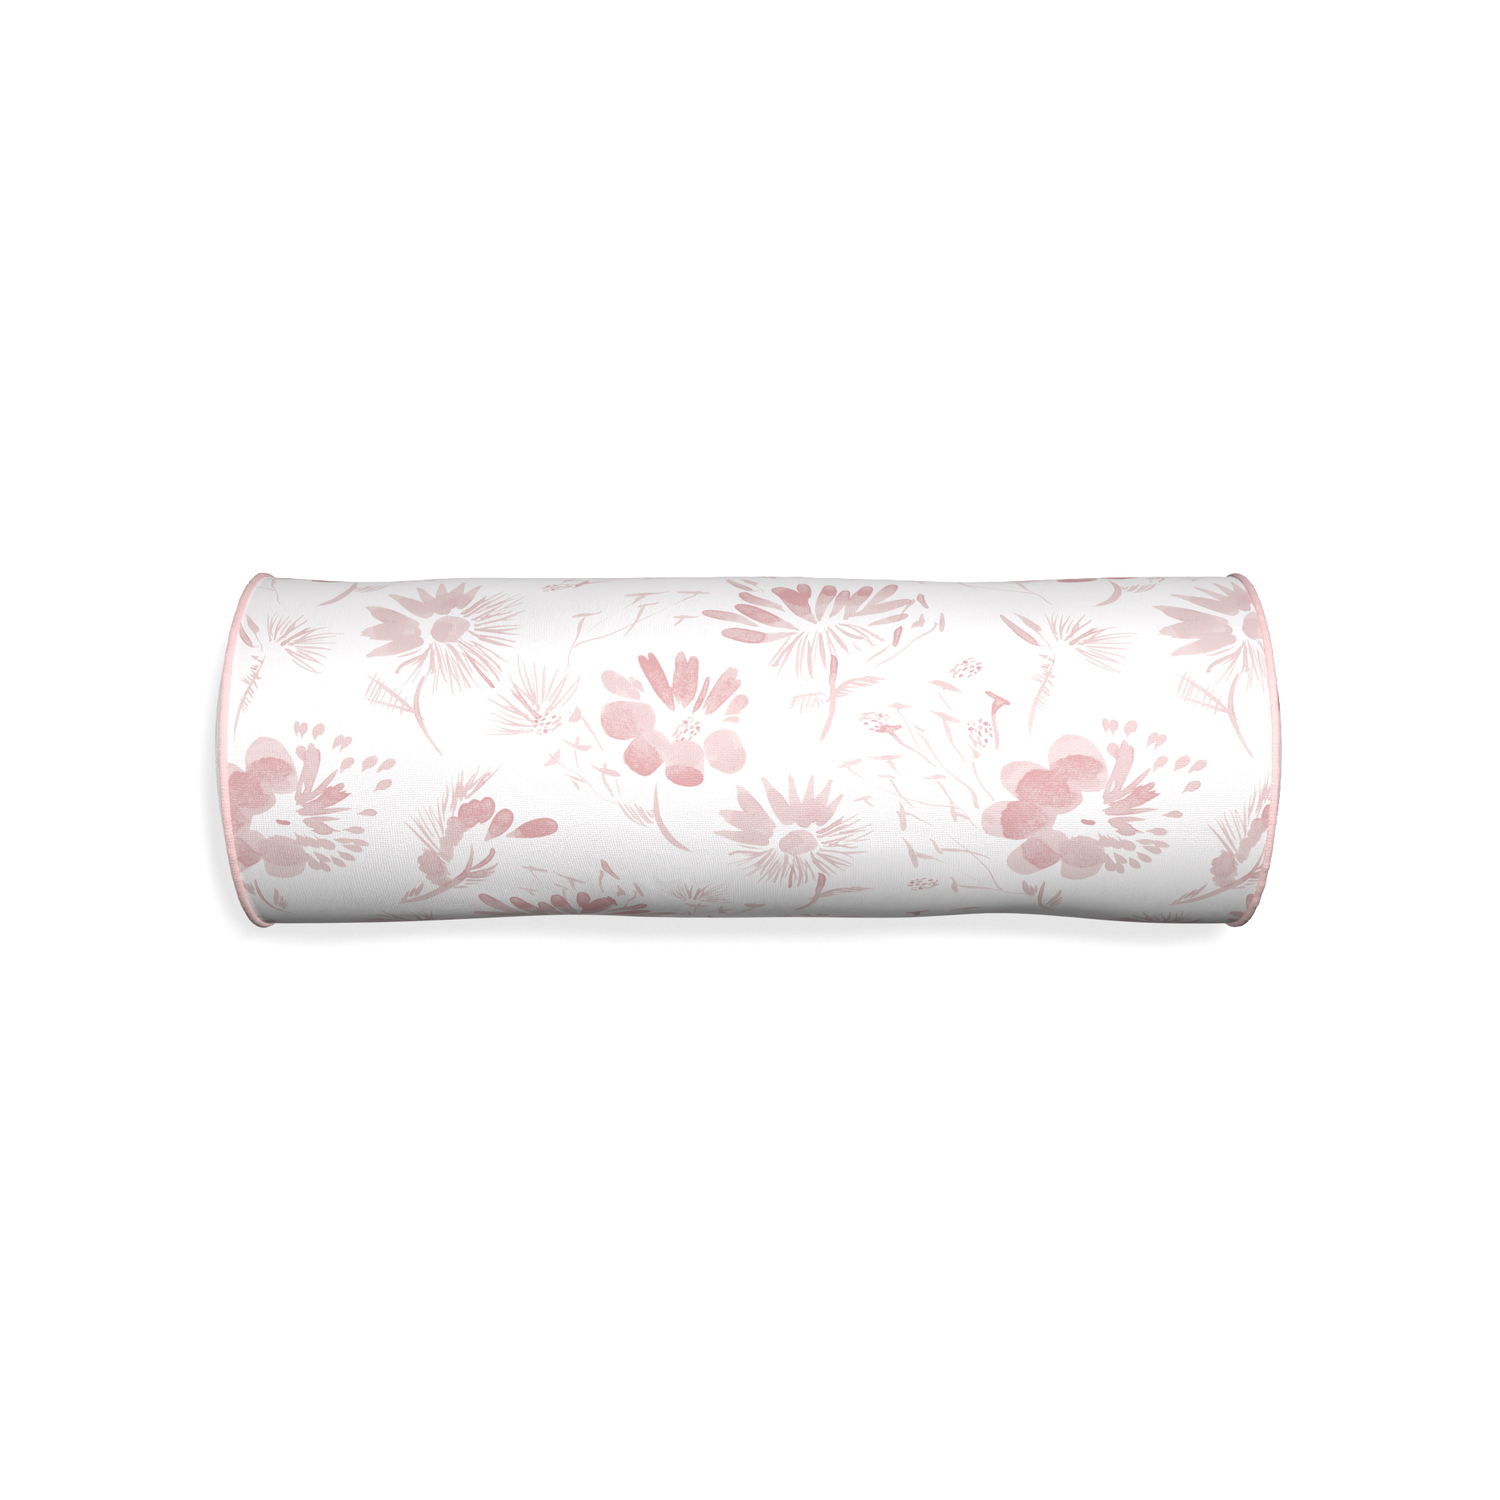 Bolster blake custom pillow with petal piping on white background